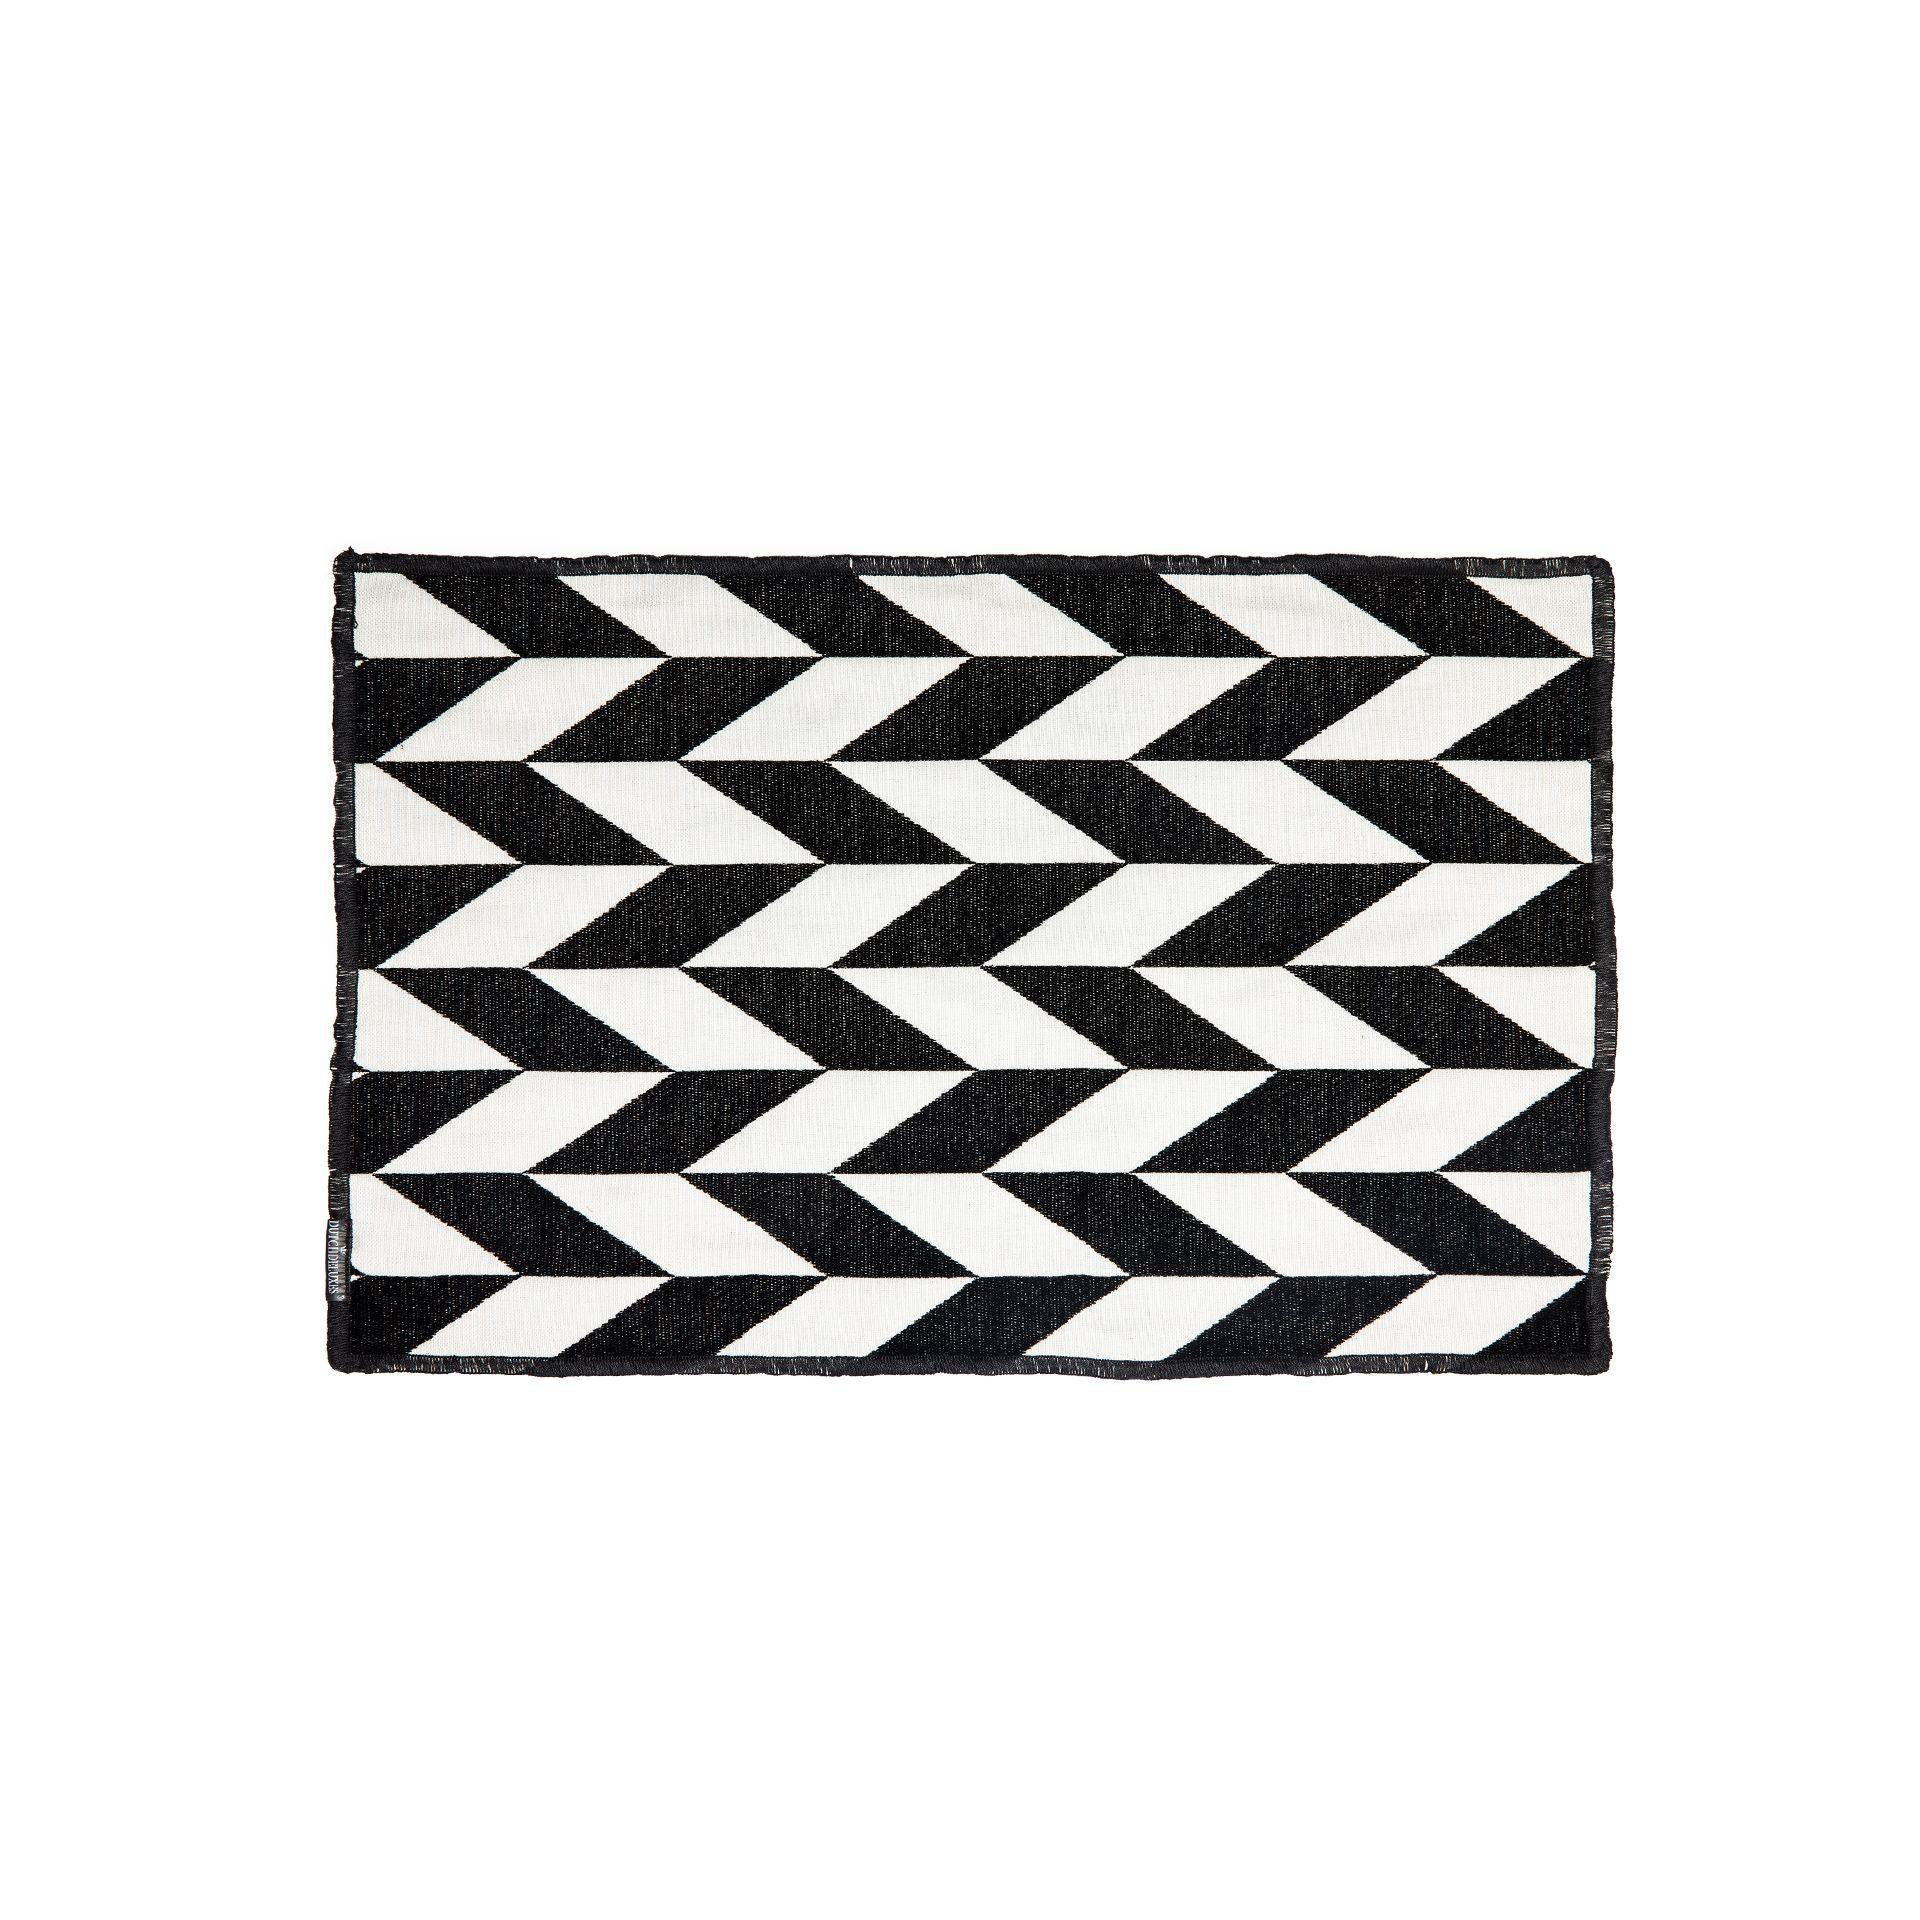 Dutchdeluxes Placemat Set Of 4 Black & White, Fishbone